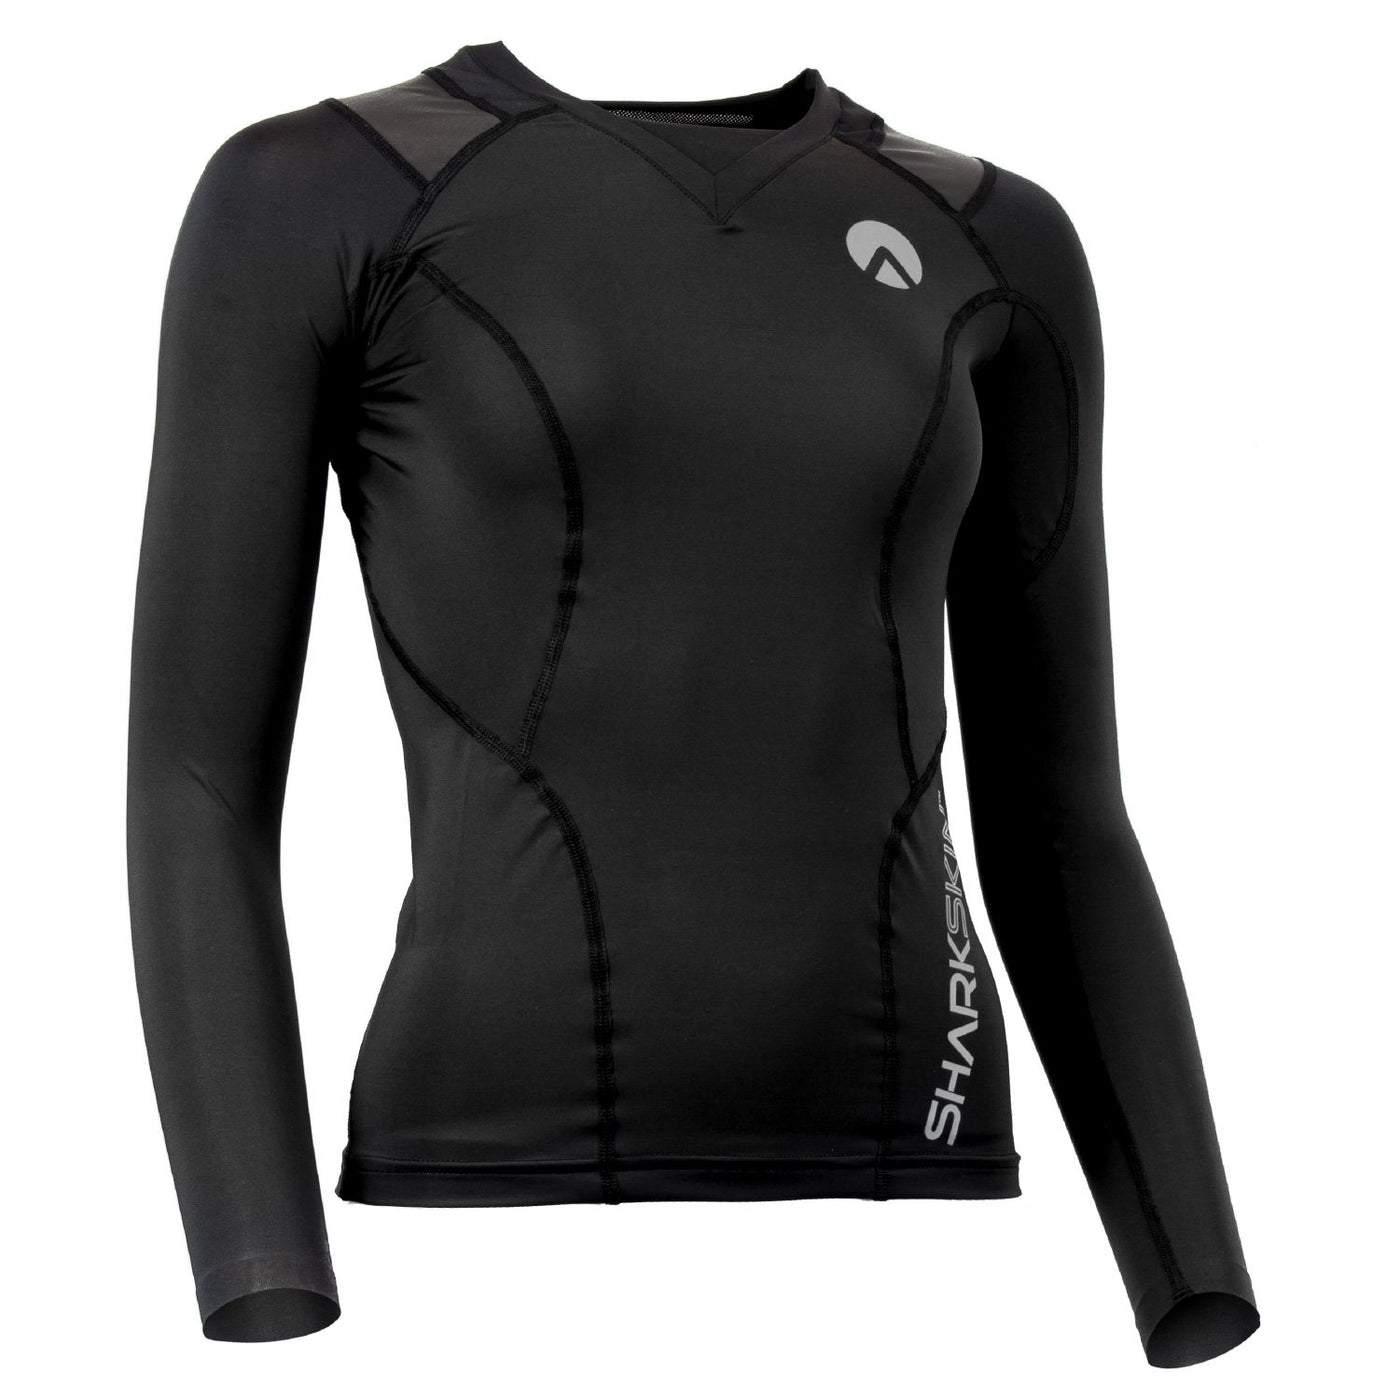 R-SERIES COMPRESSION LONG SLEEVE - WOMENS